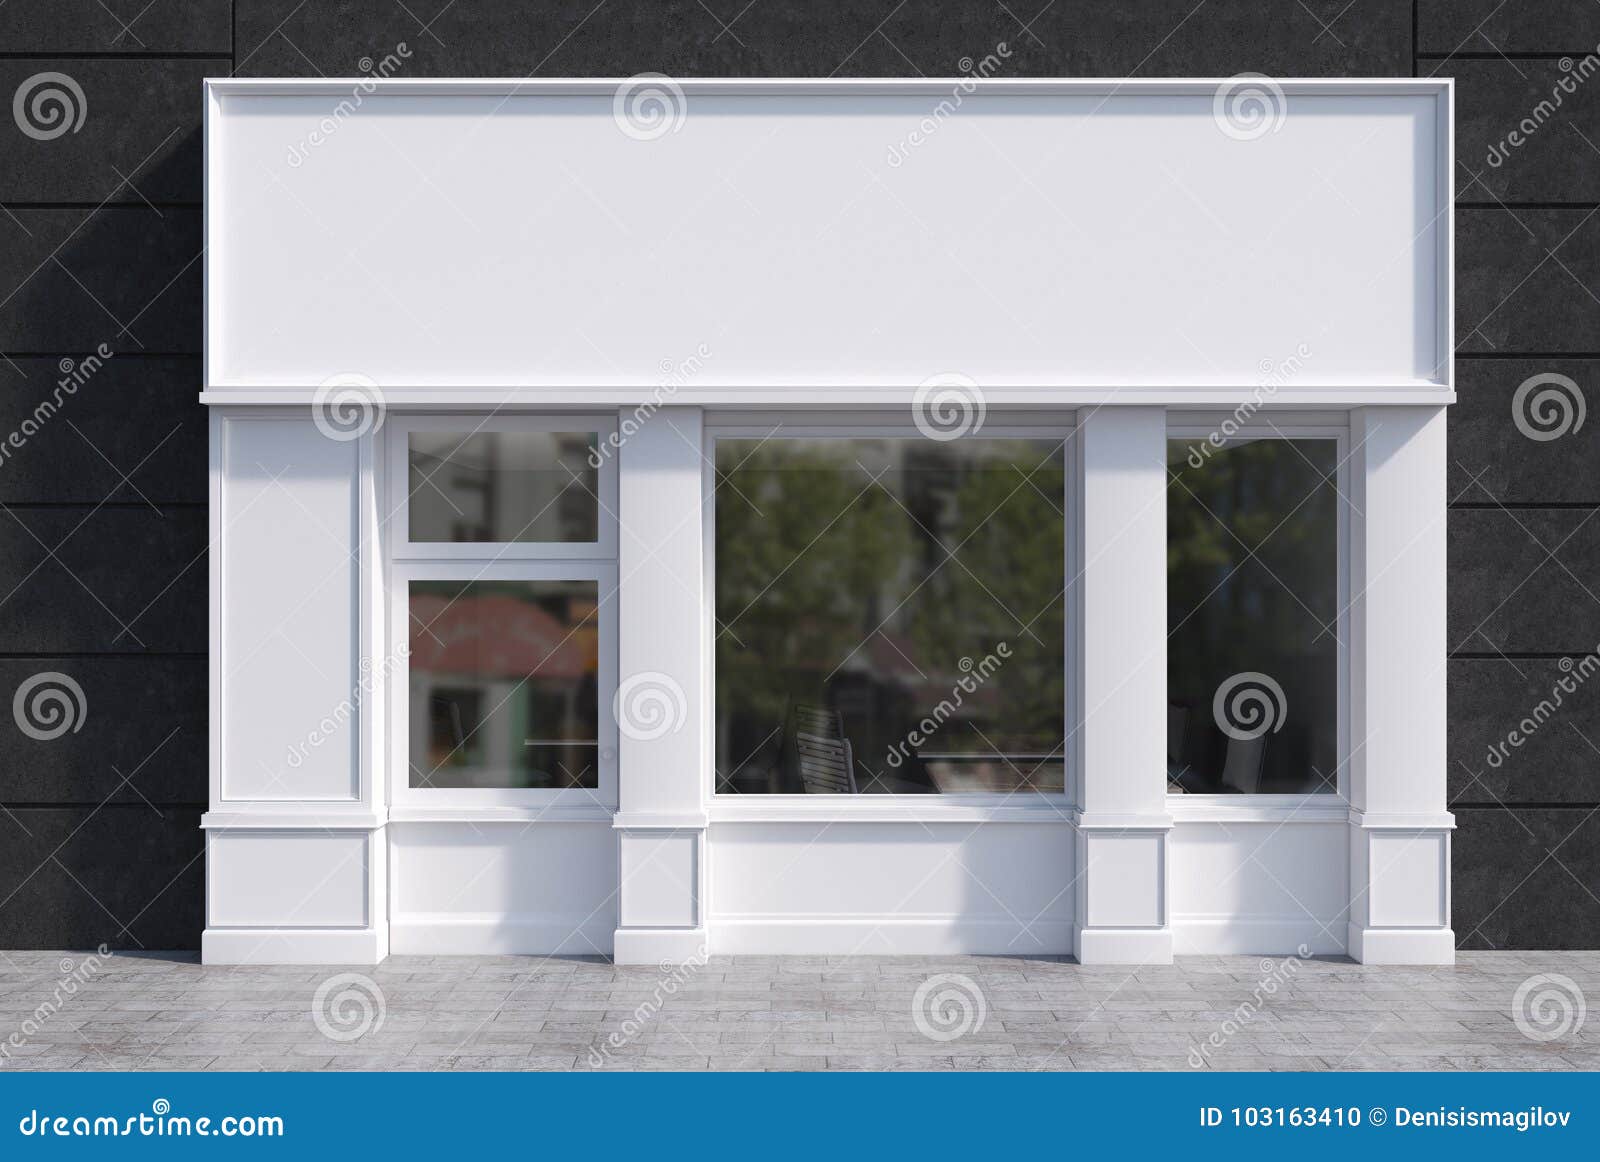 white and black cafe facade with a poster